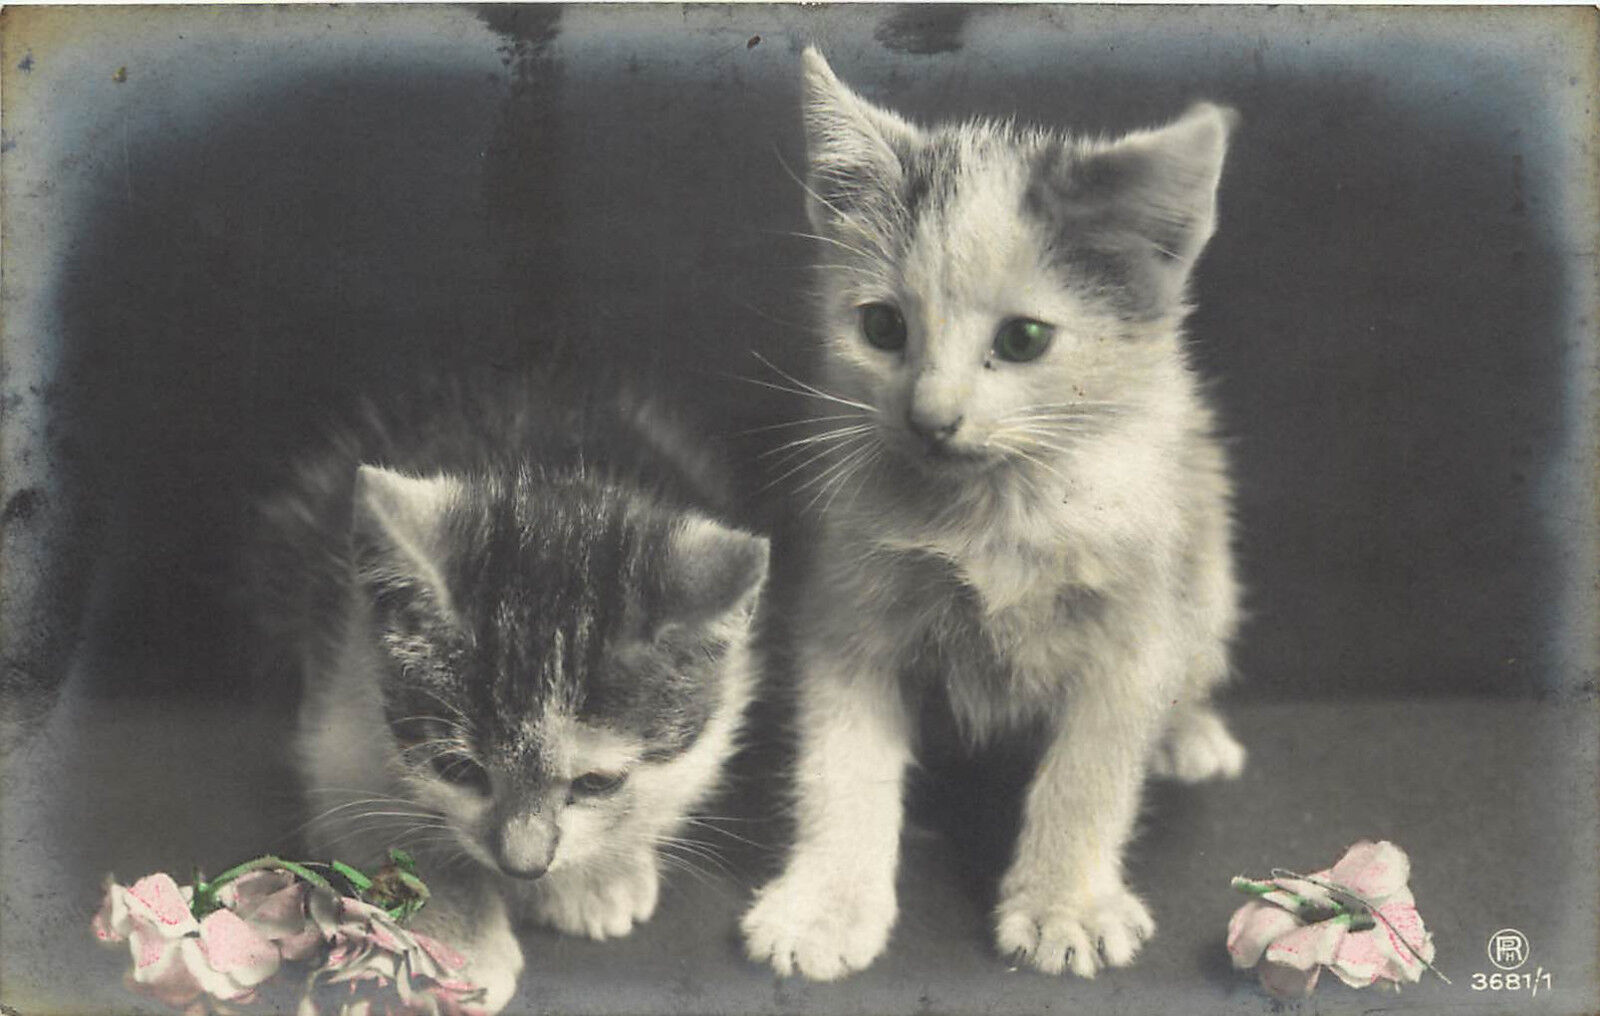 c1910 RPPC Postcard Hand Colored Kittens and Flowers RPH 3681/1